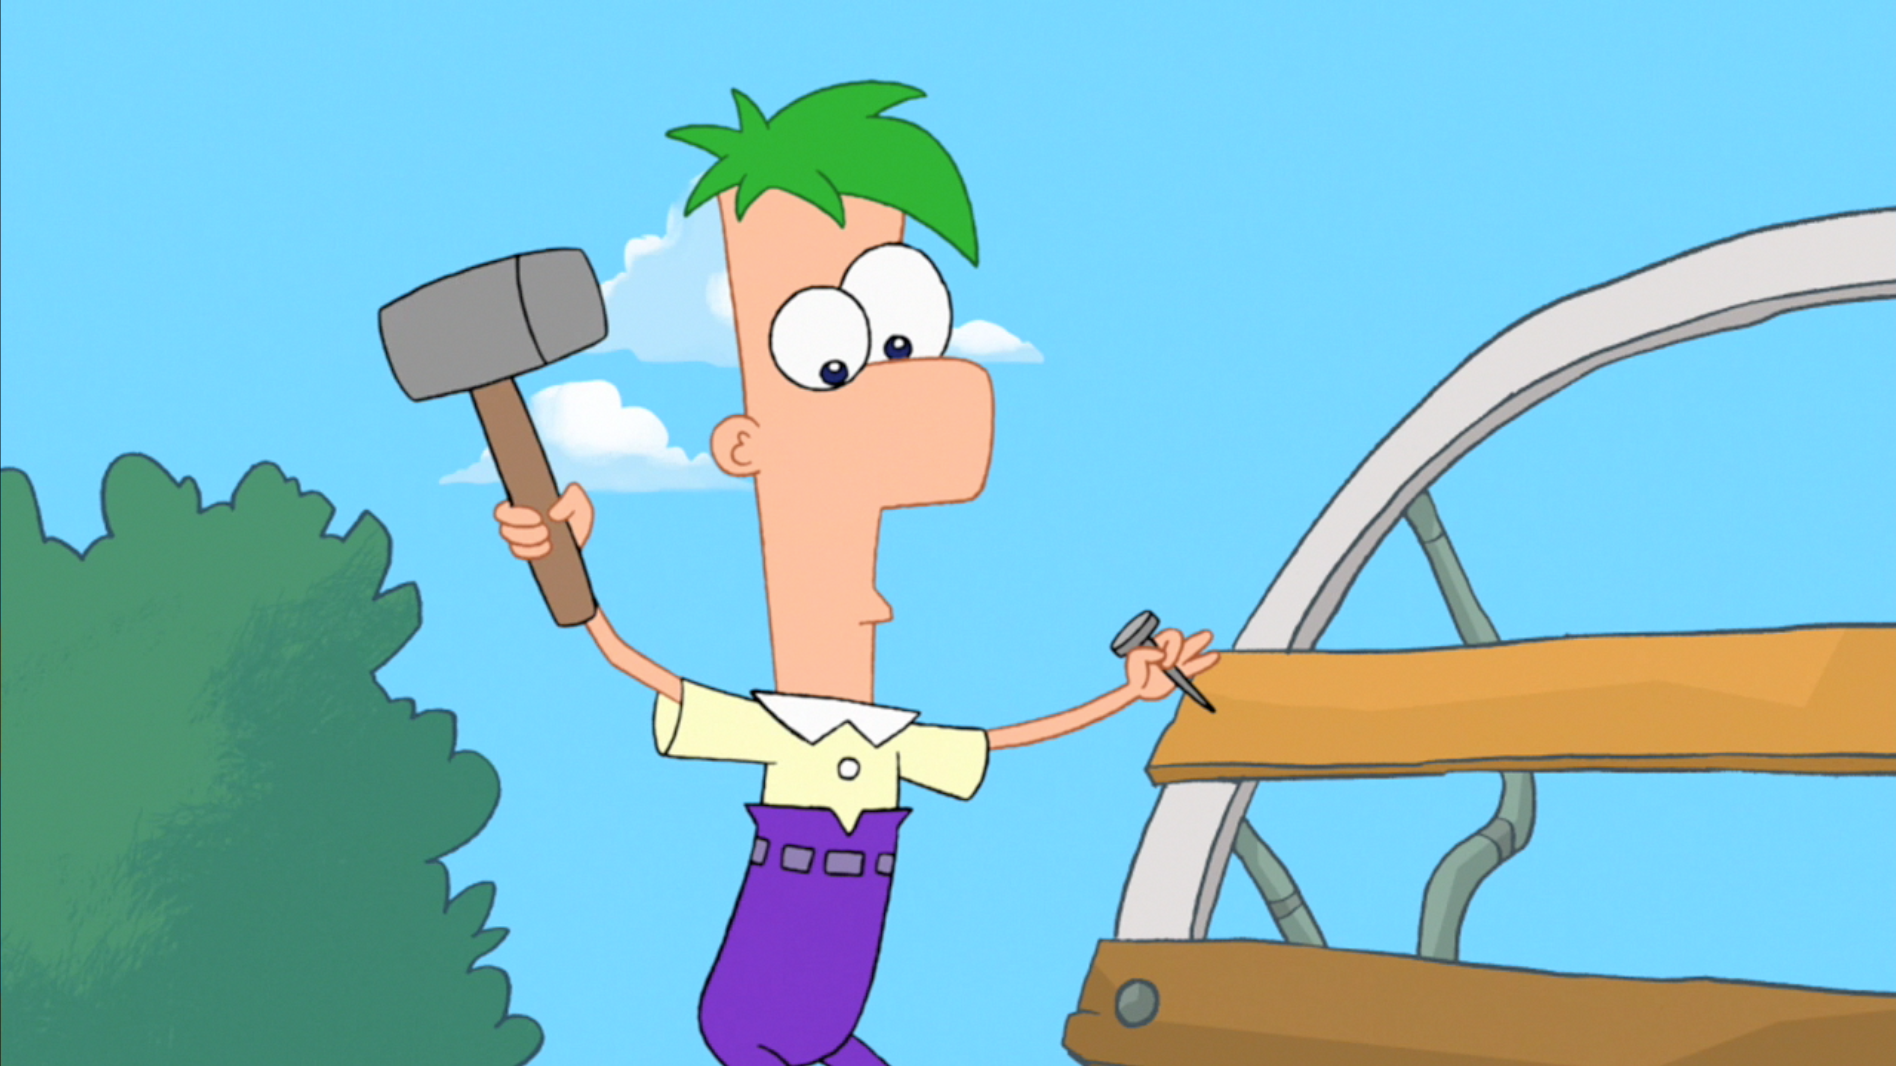 Porn Phineas And Ferb And Vanessa Lawrence - Ferb Fletcher | Phineas and Ferb Wiki | FANDOM powered by Wikia